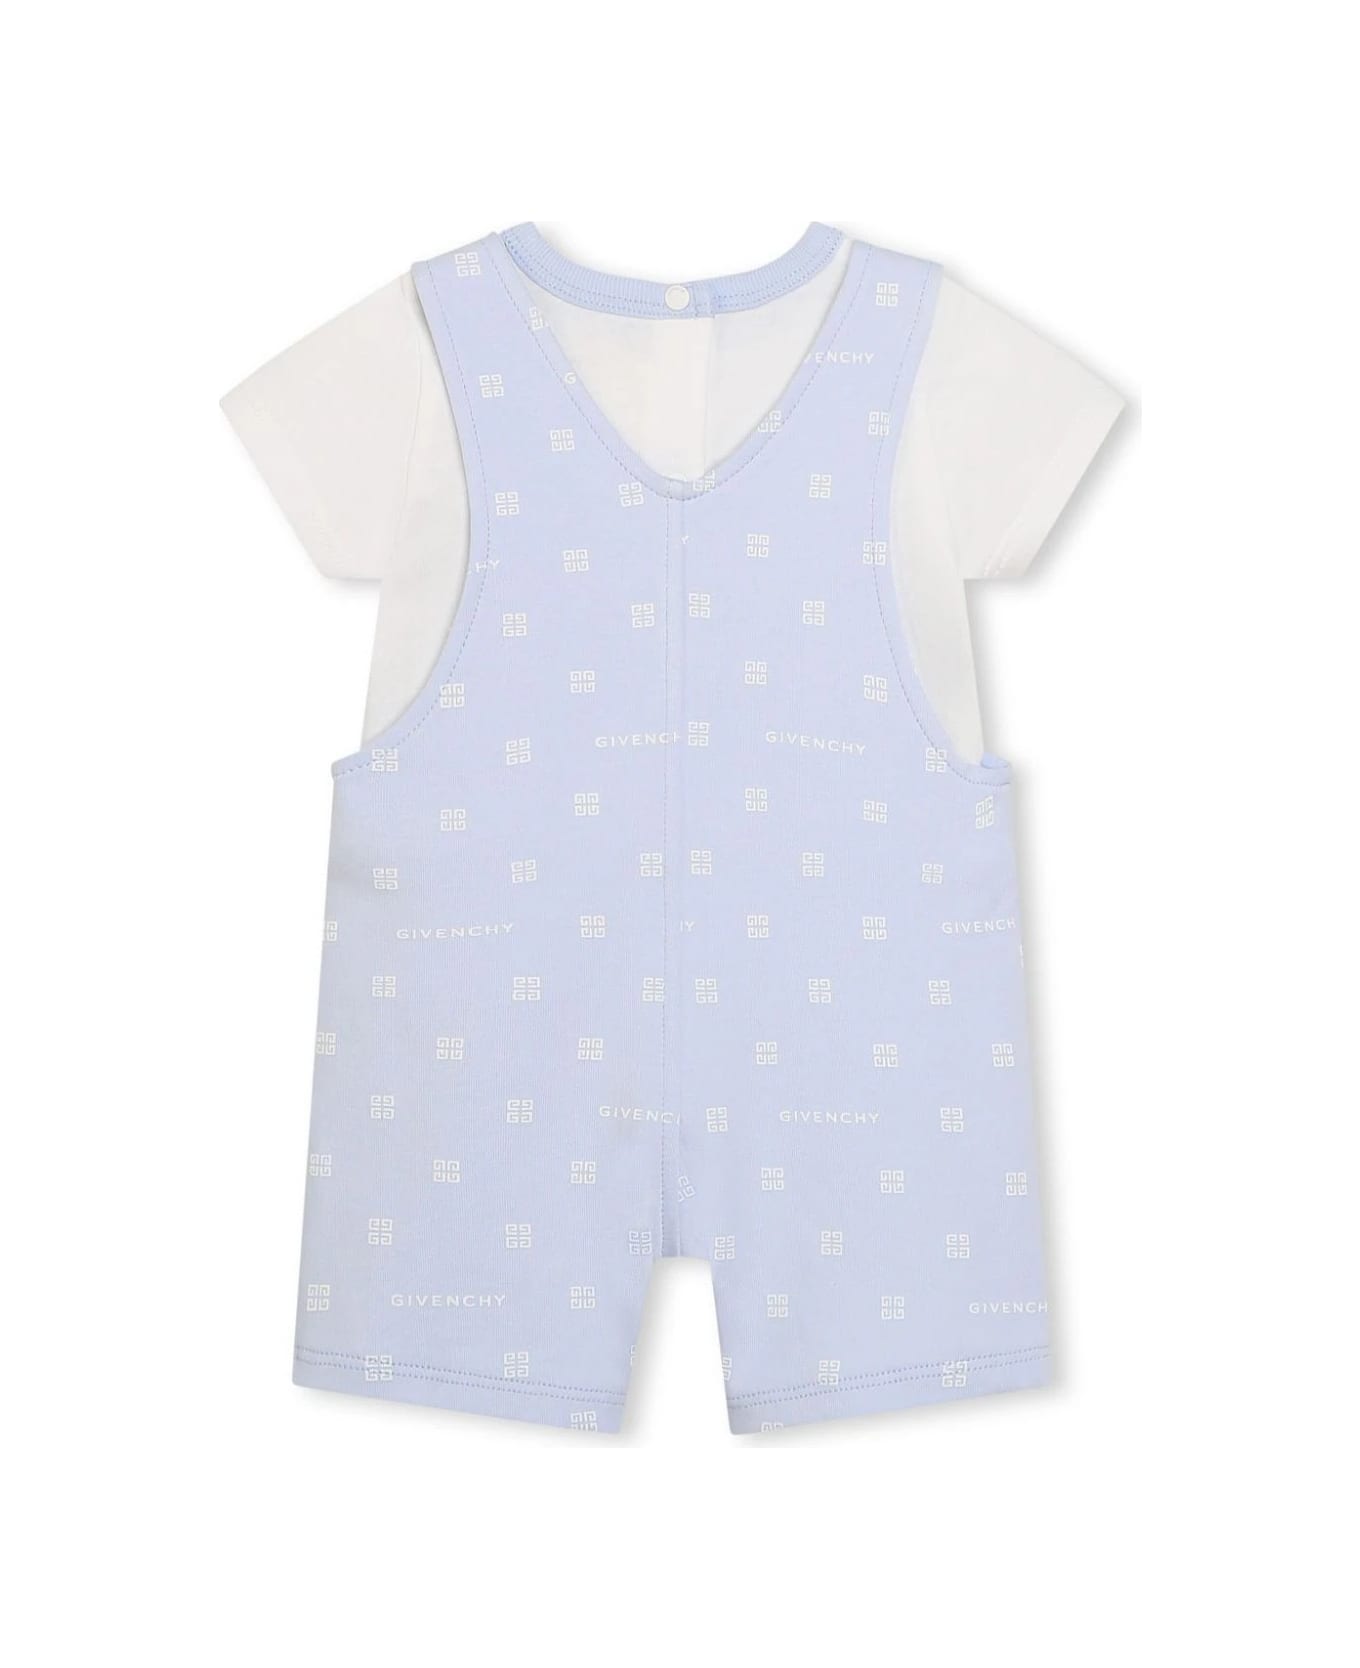 Givenchy 4g T-shirt And Dungaree Set In White And Light Blue - Blue ボディスーツ＆セットアップ